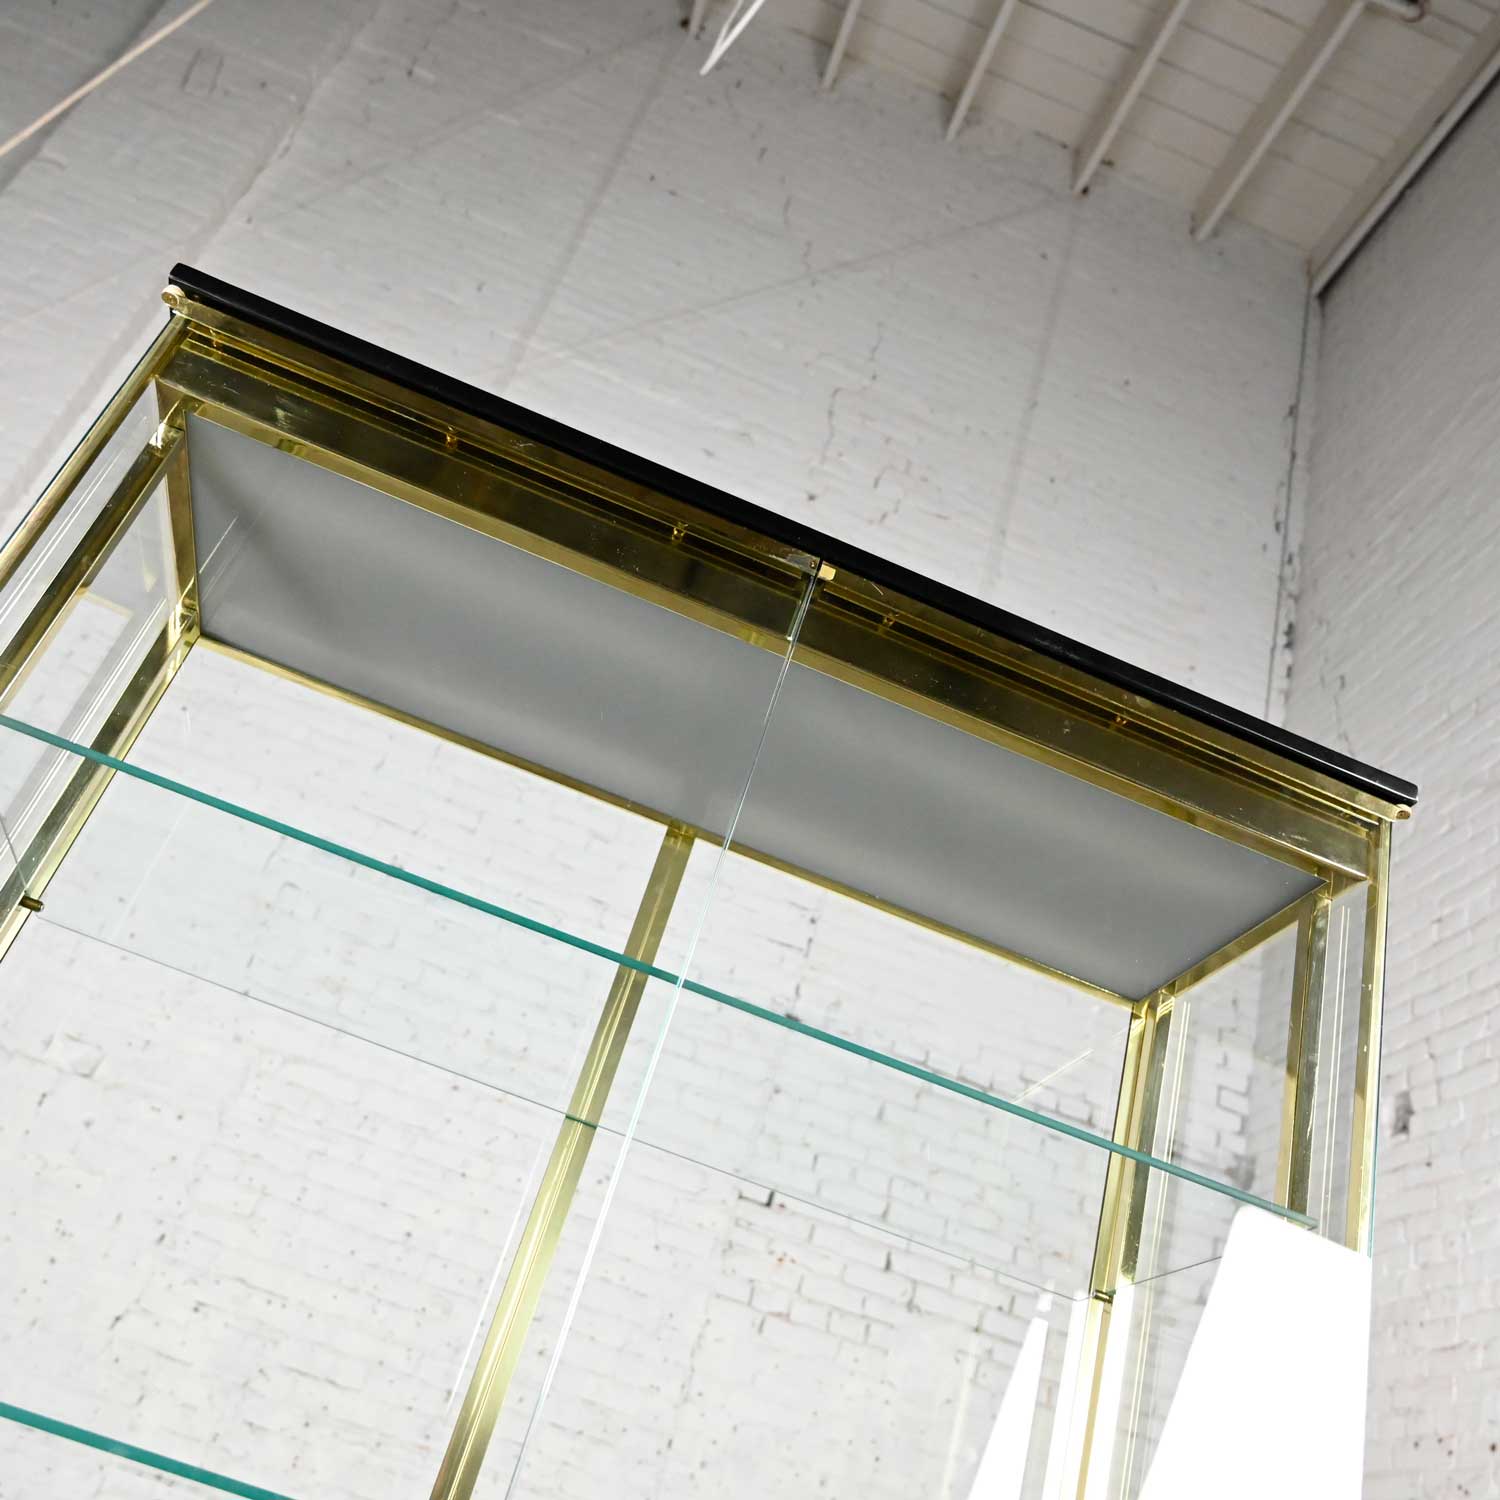 Modern All Glass Lighted Display Cabinet Brass Plated Framework by Design Institute of America or DIA